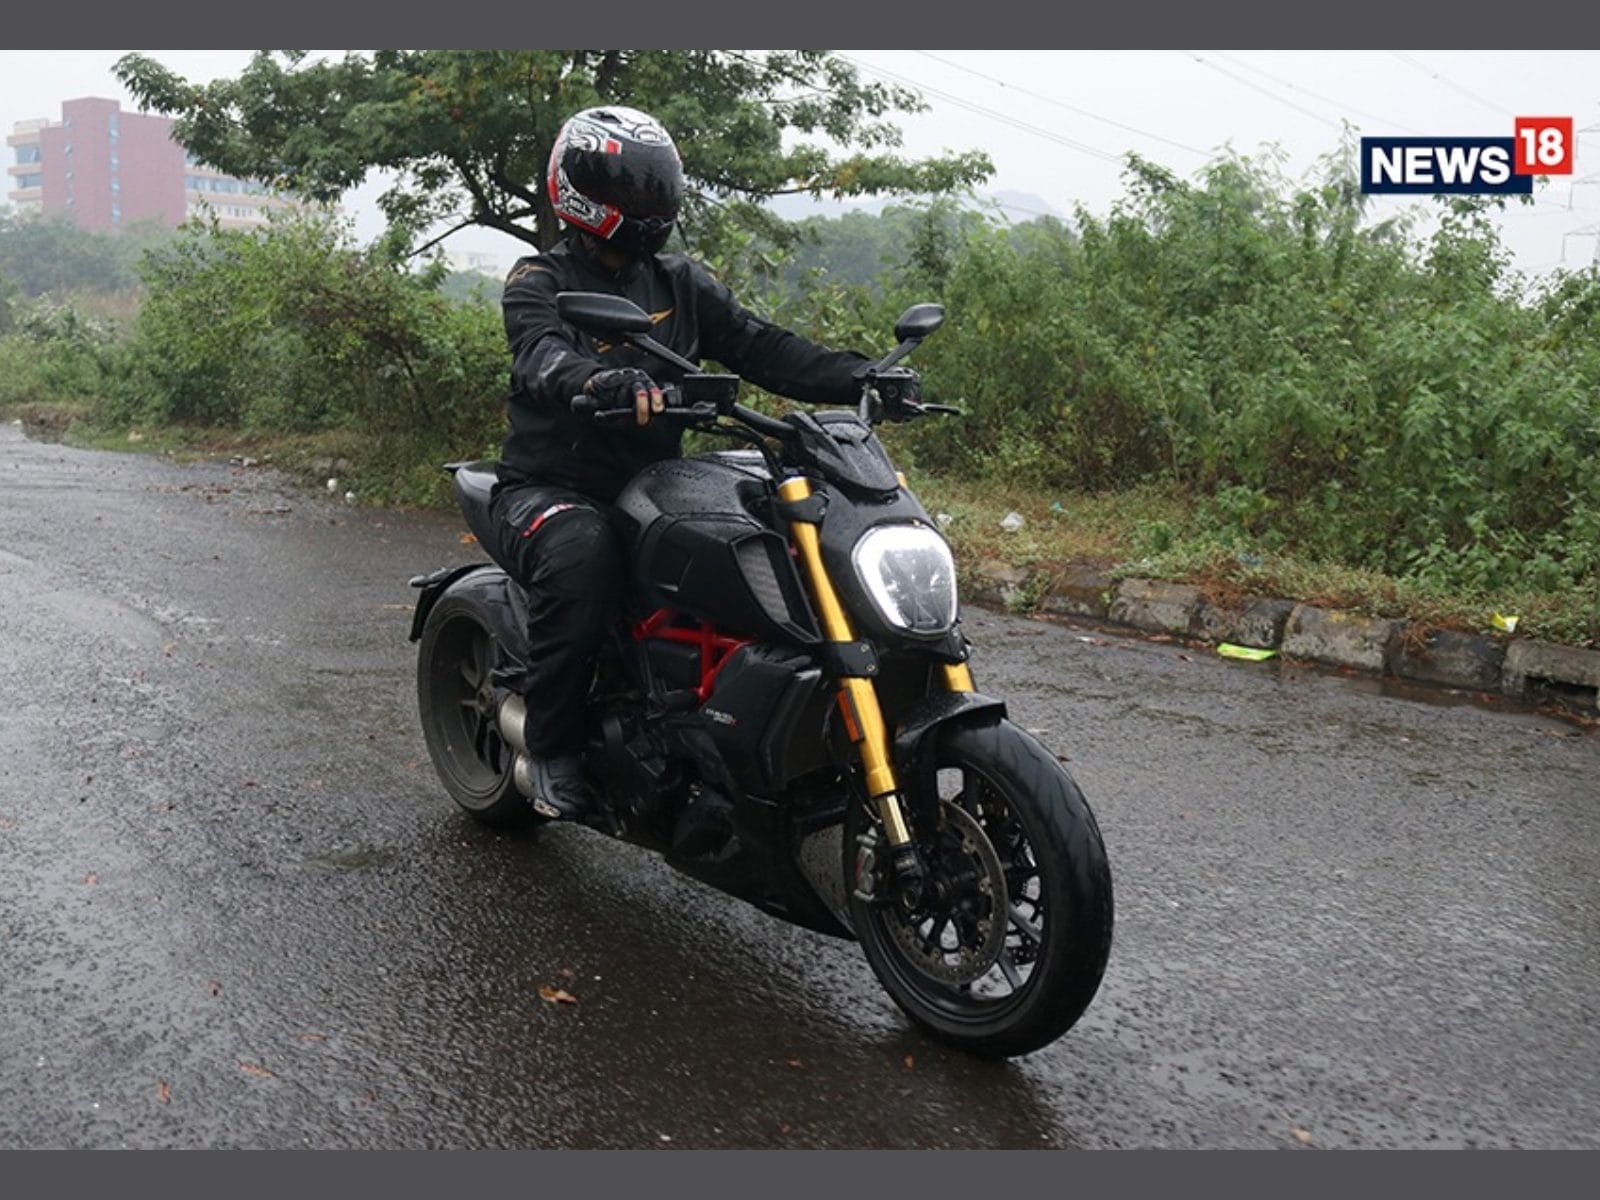 2020 Ducati Diavel 1260 S Review  Cycle News